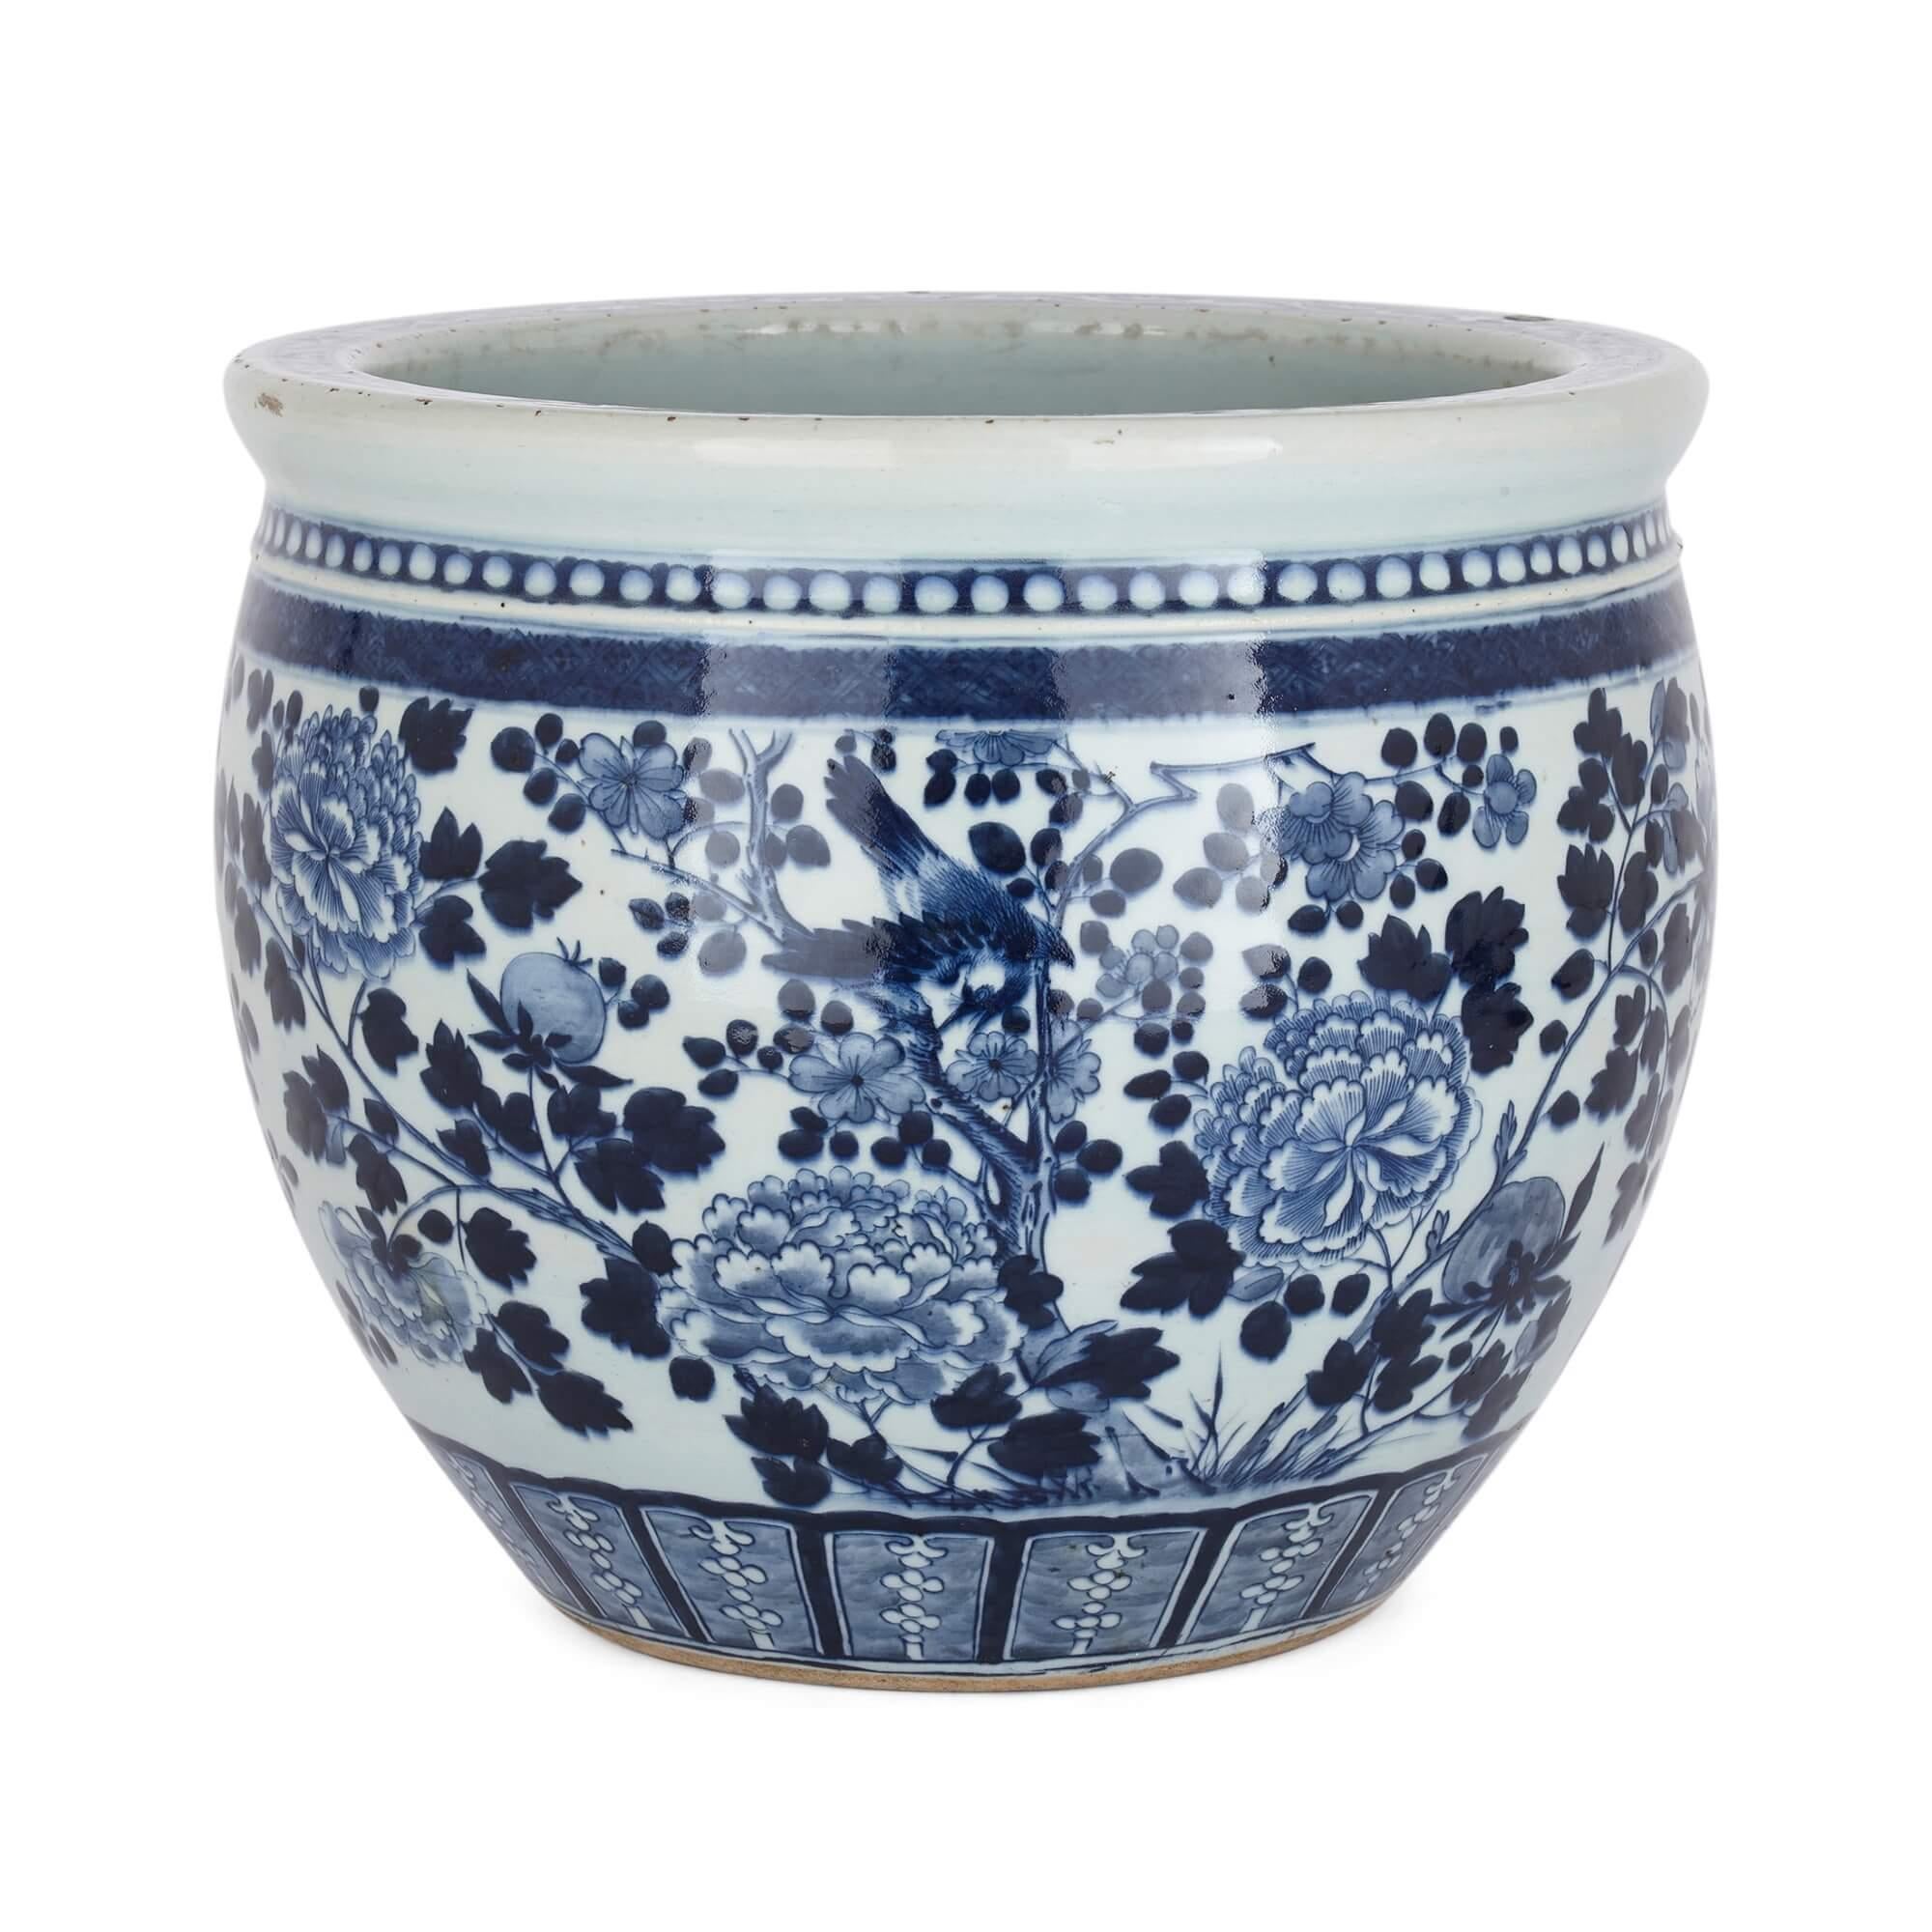 Chinese blue and white antique ceramic jardiniere with floral designs
Chinese, Early 20th Century
Height 31cm, diameter 37cm

This charming Chinese antique ceramic jardiniere features nature-inspired patterns. Blossom trees, flowers and birds